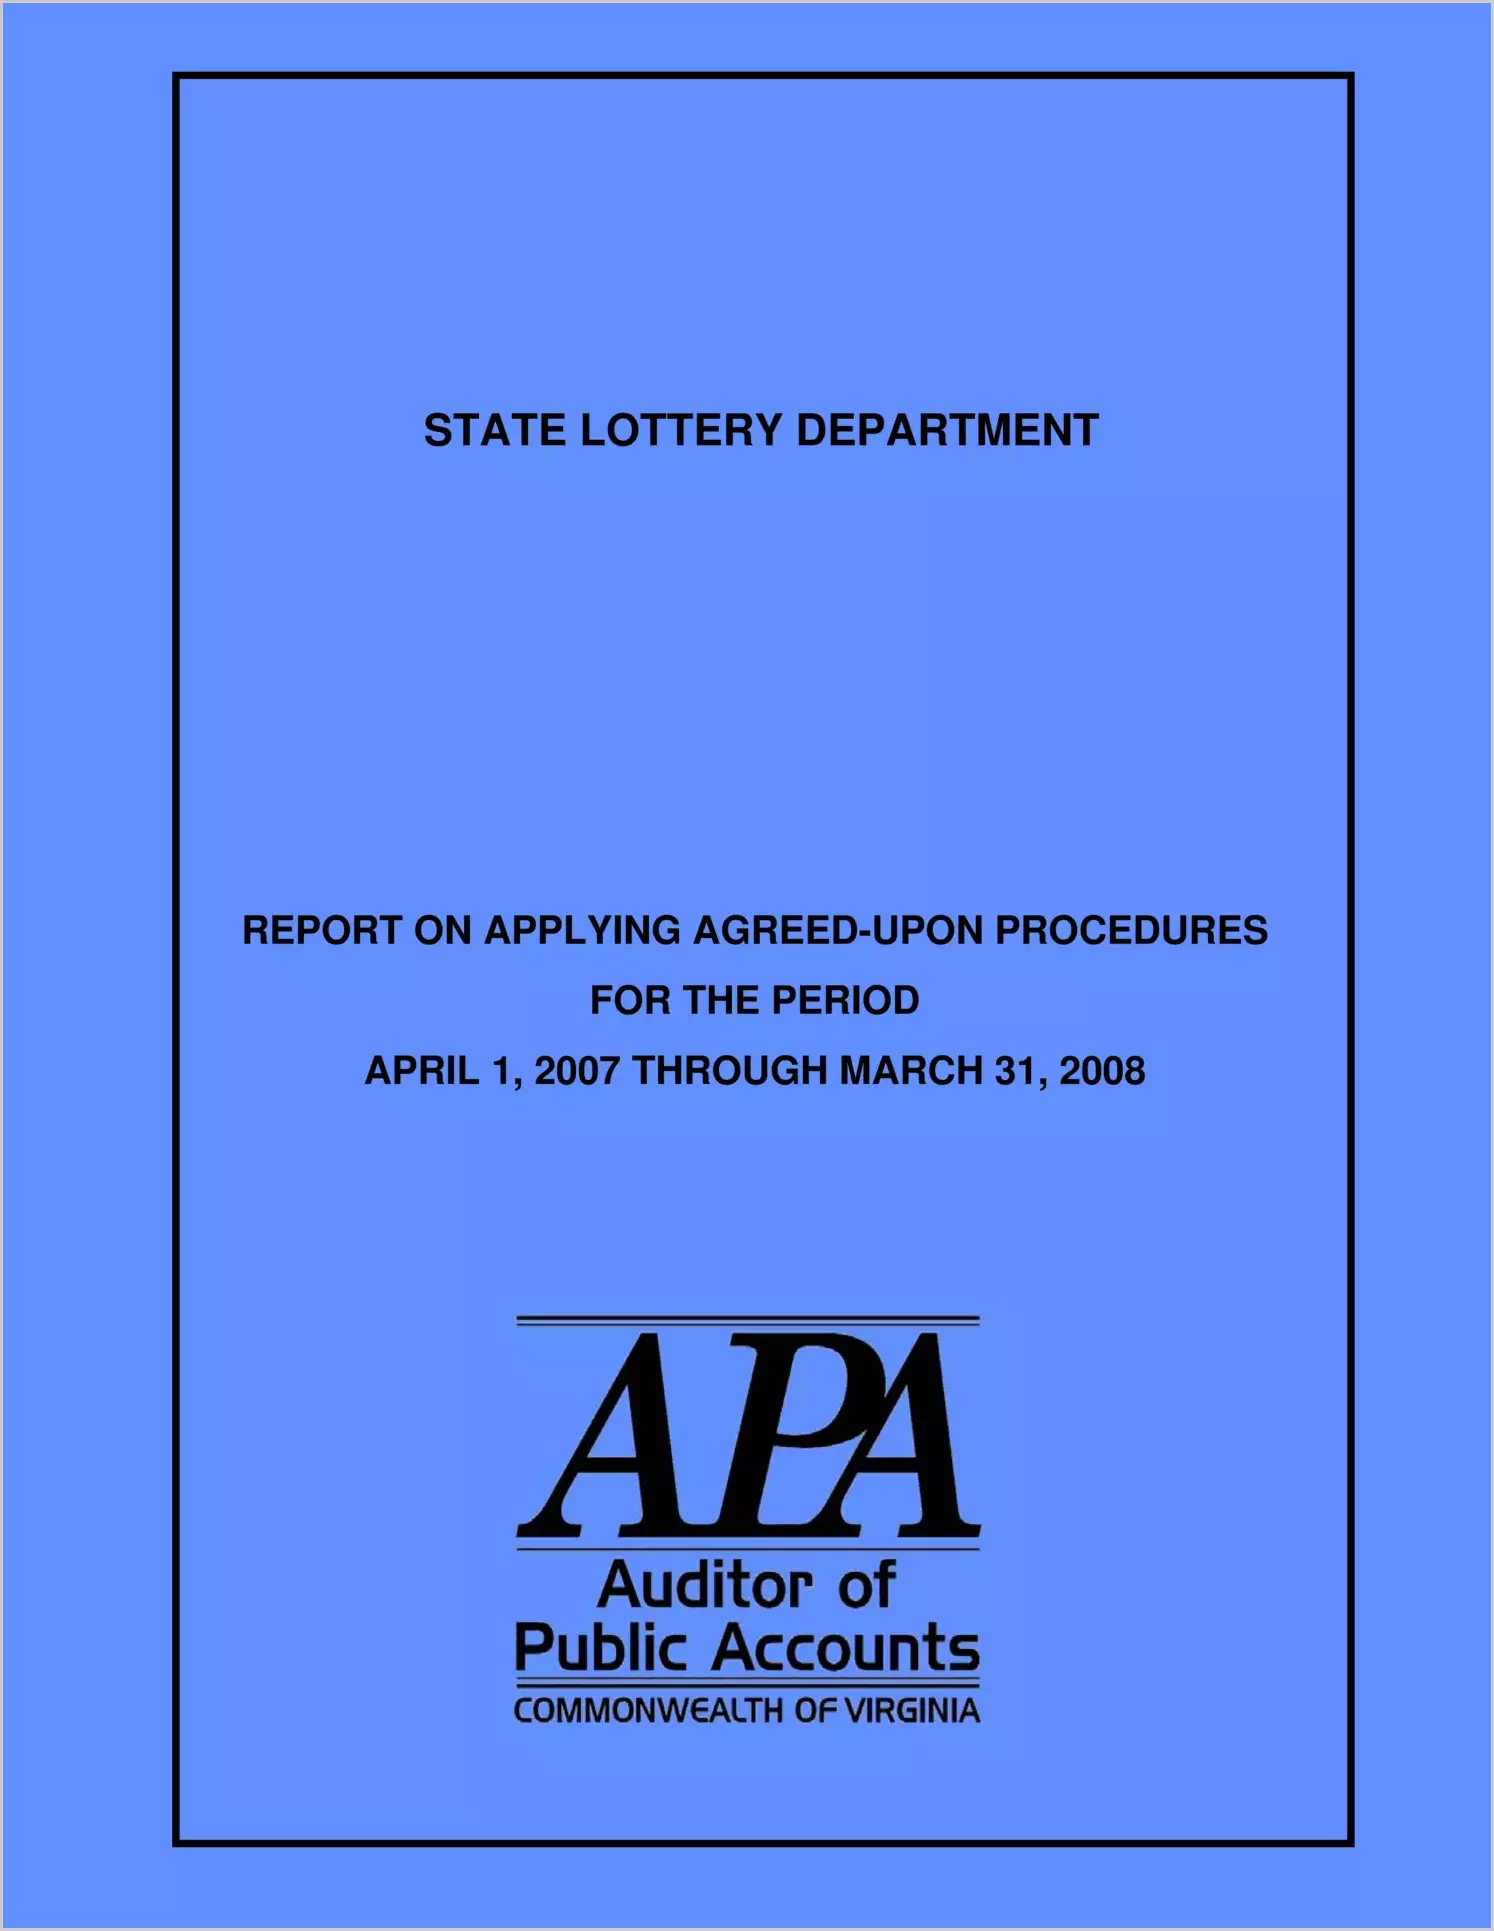 State Lottery Department report on Applying Agreed-Upon Procedures for the period April 1, 2007 throuhg March 31, 2008